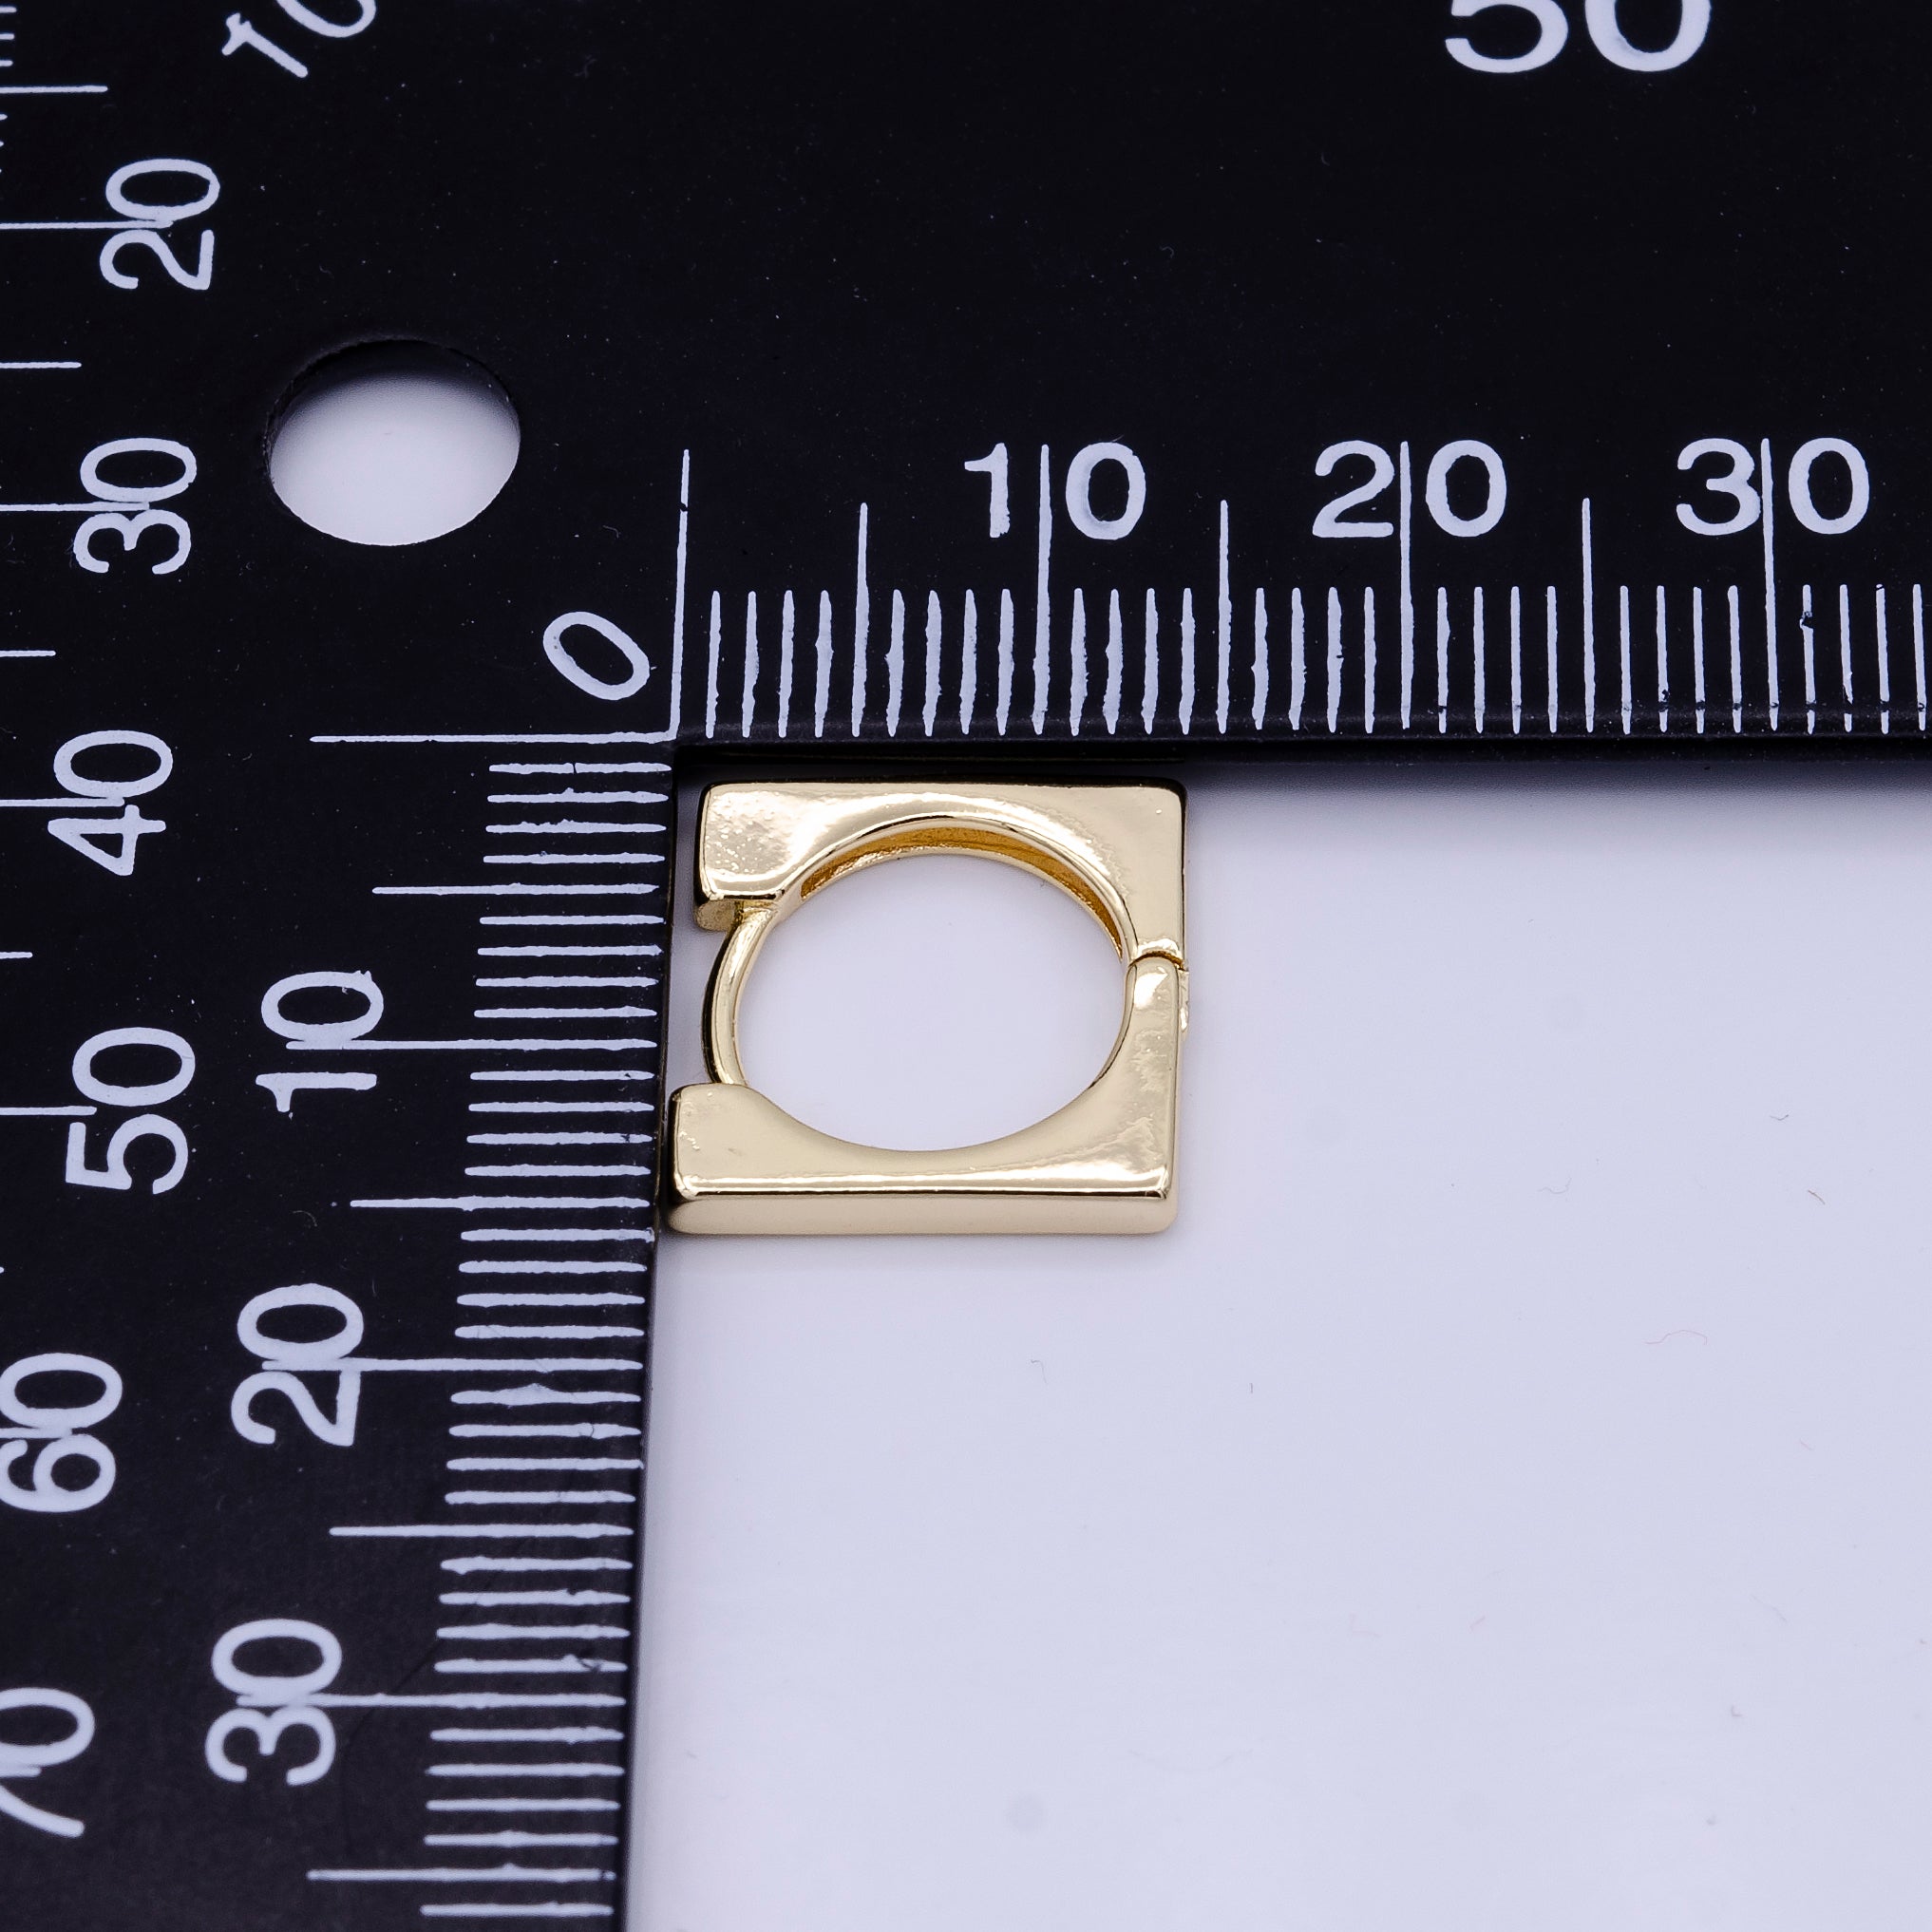 Gold, Silver 14mm Square Rounded Thin Huggie Earrings | AD875 AD876 - DLUXCA